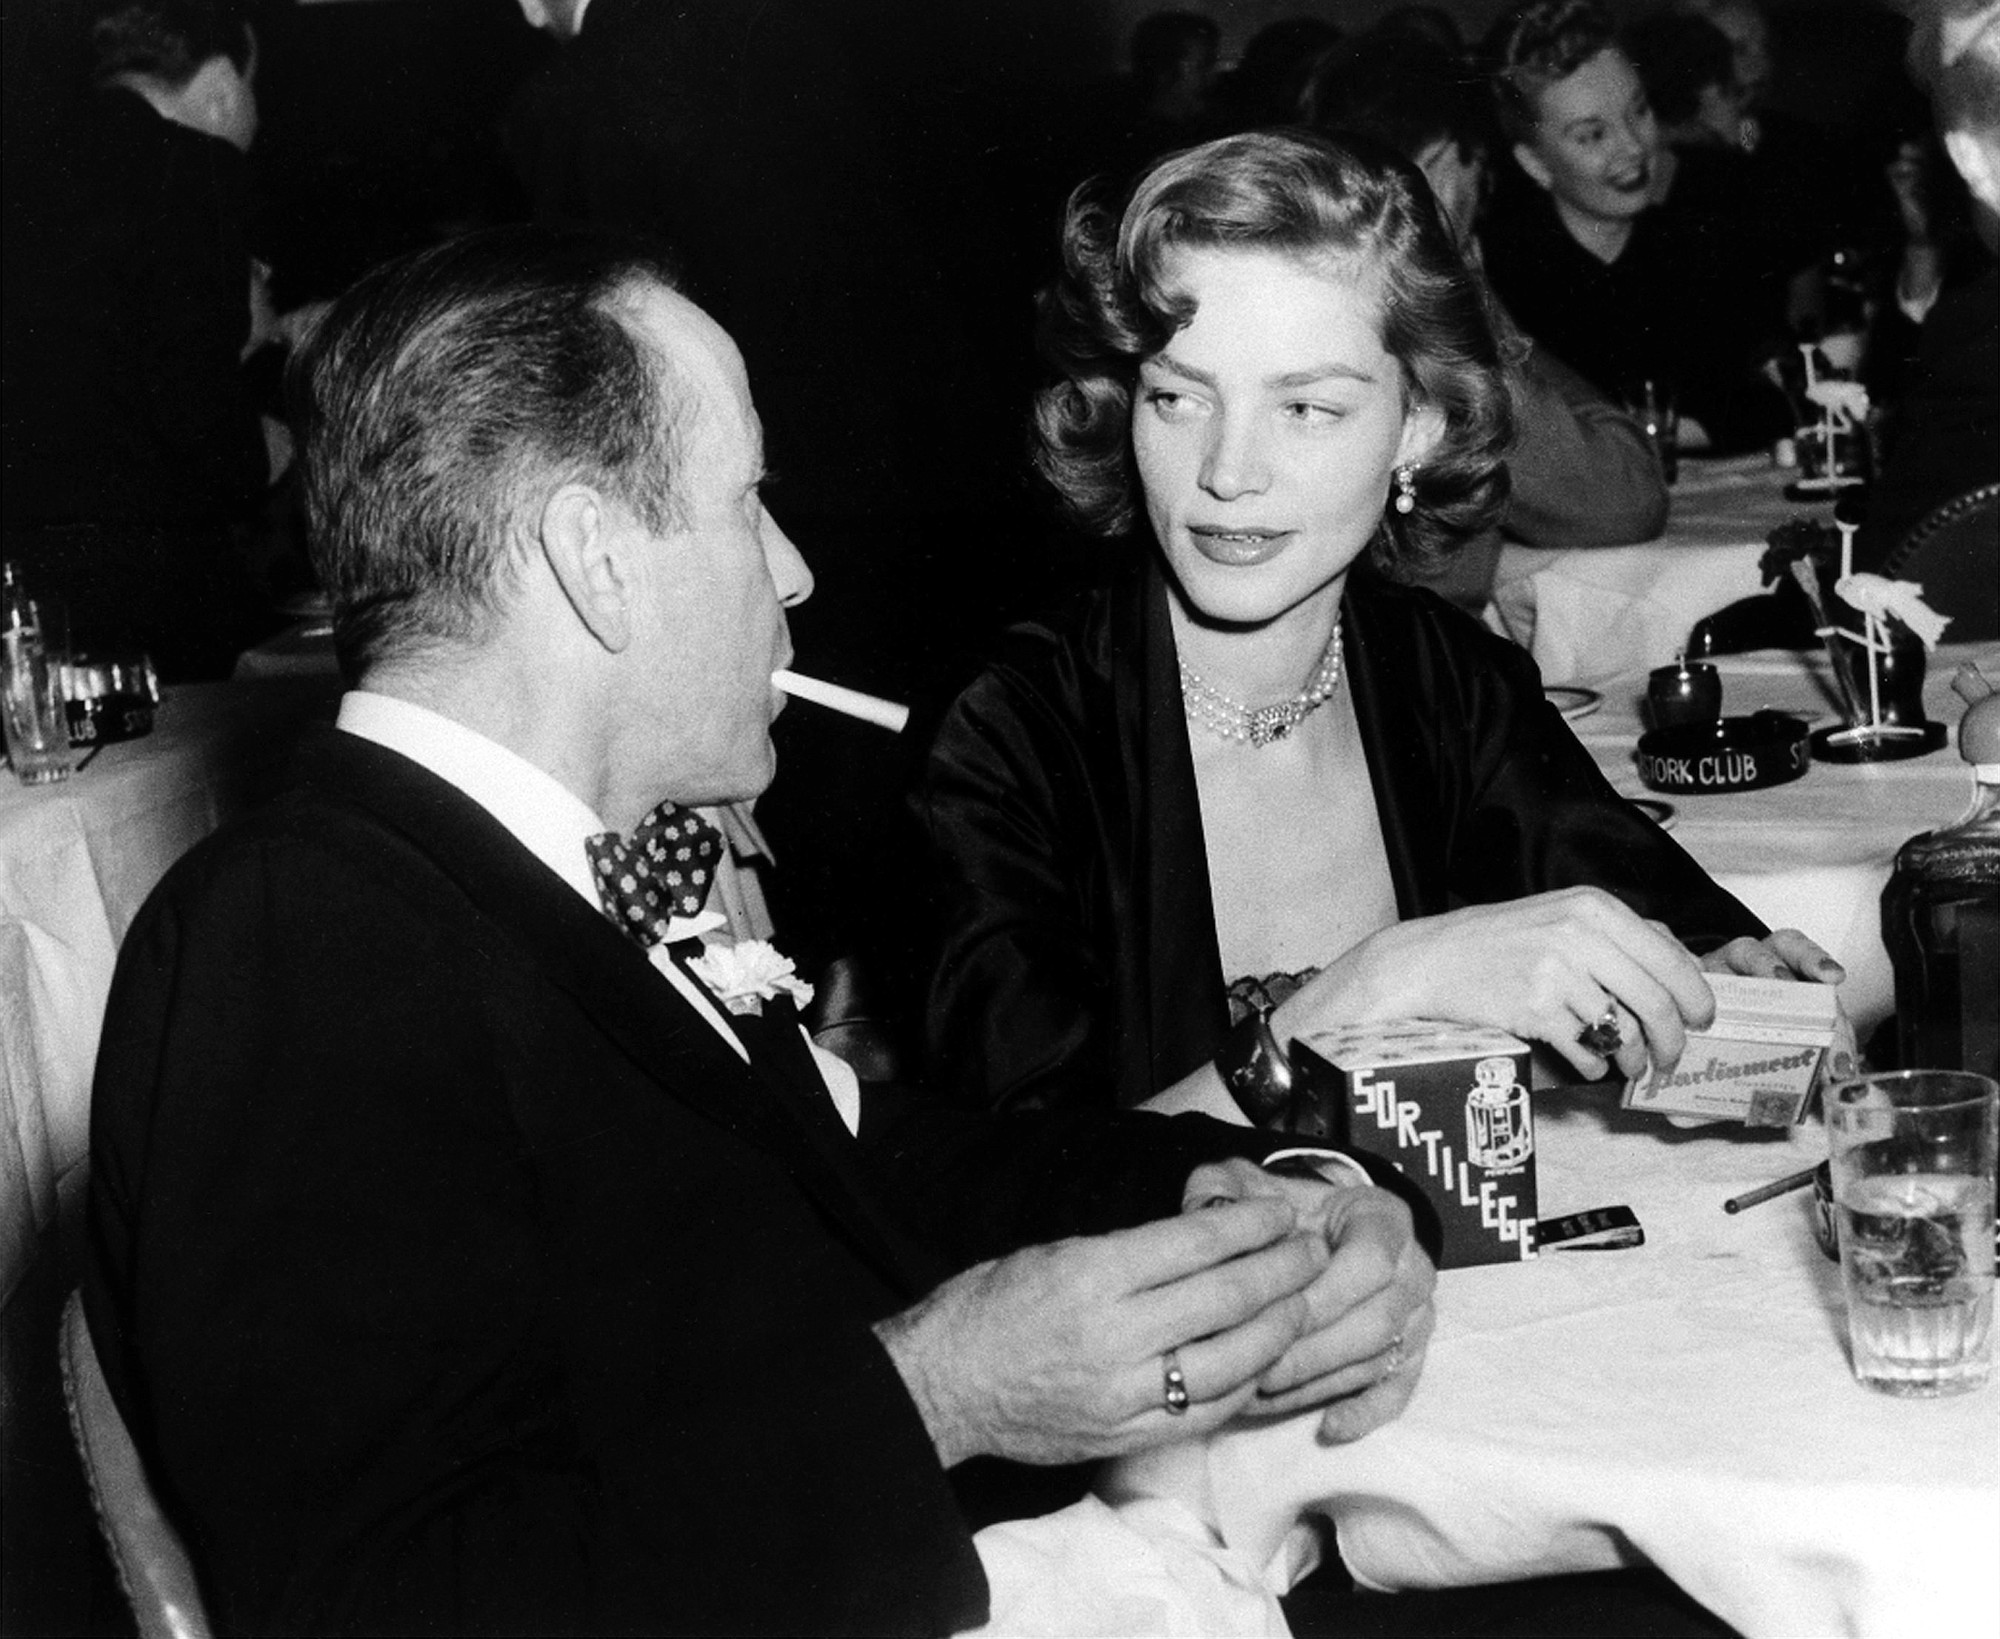 Actor Humphrey Bogart, left, and his wife, actress Lauren Bacall, appear at the Stork Club in New York in February 1950. Bacall, the sultry-voiced actress and Humphrey Bogart's partner off and on the screen, died Tuesday in New York.